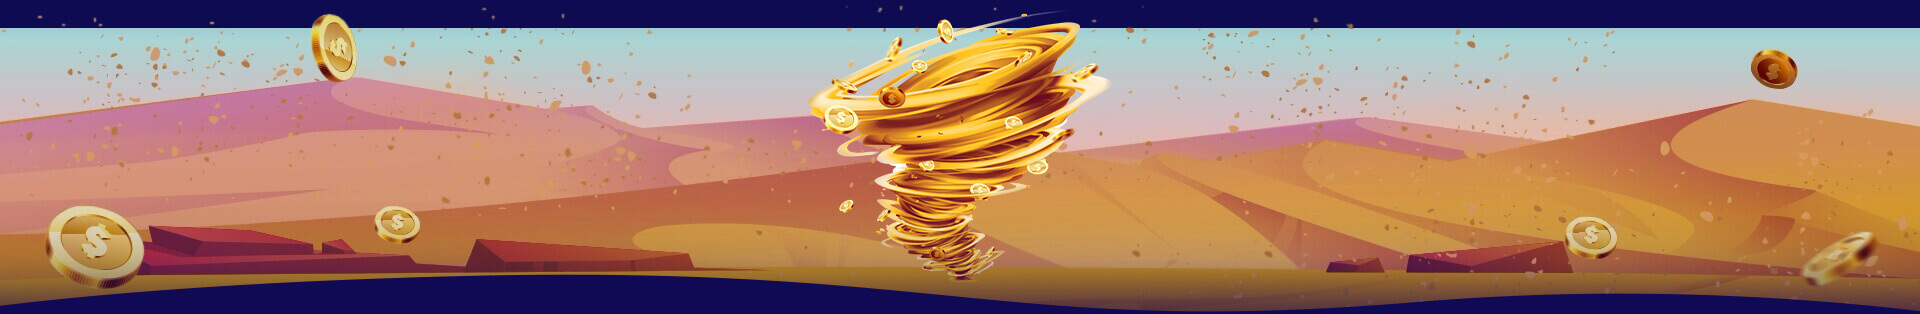 A stylized desert landscape with a cash tornado, flying golden coins and warm hues